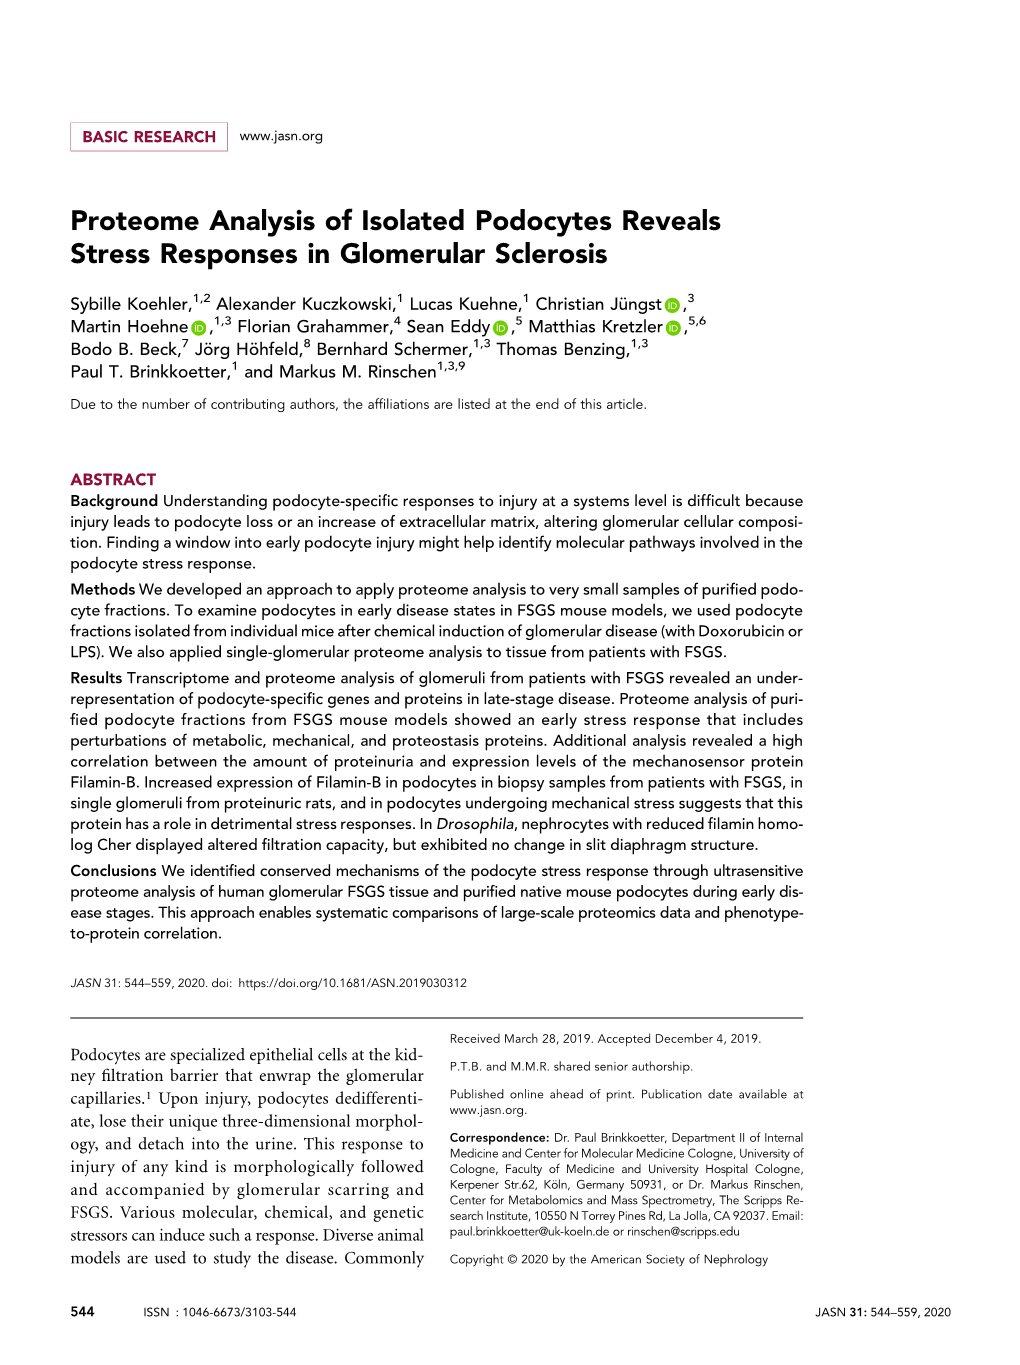 Proteome Analysis of Isolated Podocytes Reveals Stress Responses in Glomerular Sclerosis